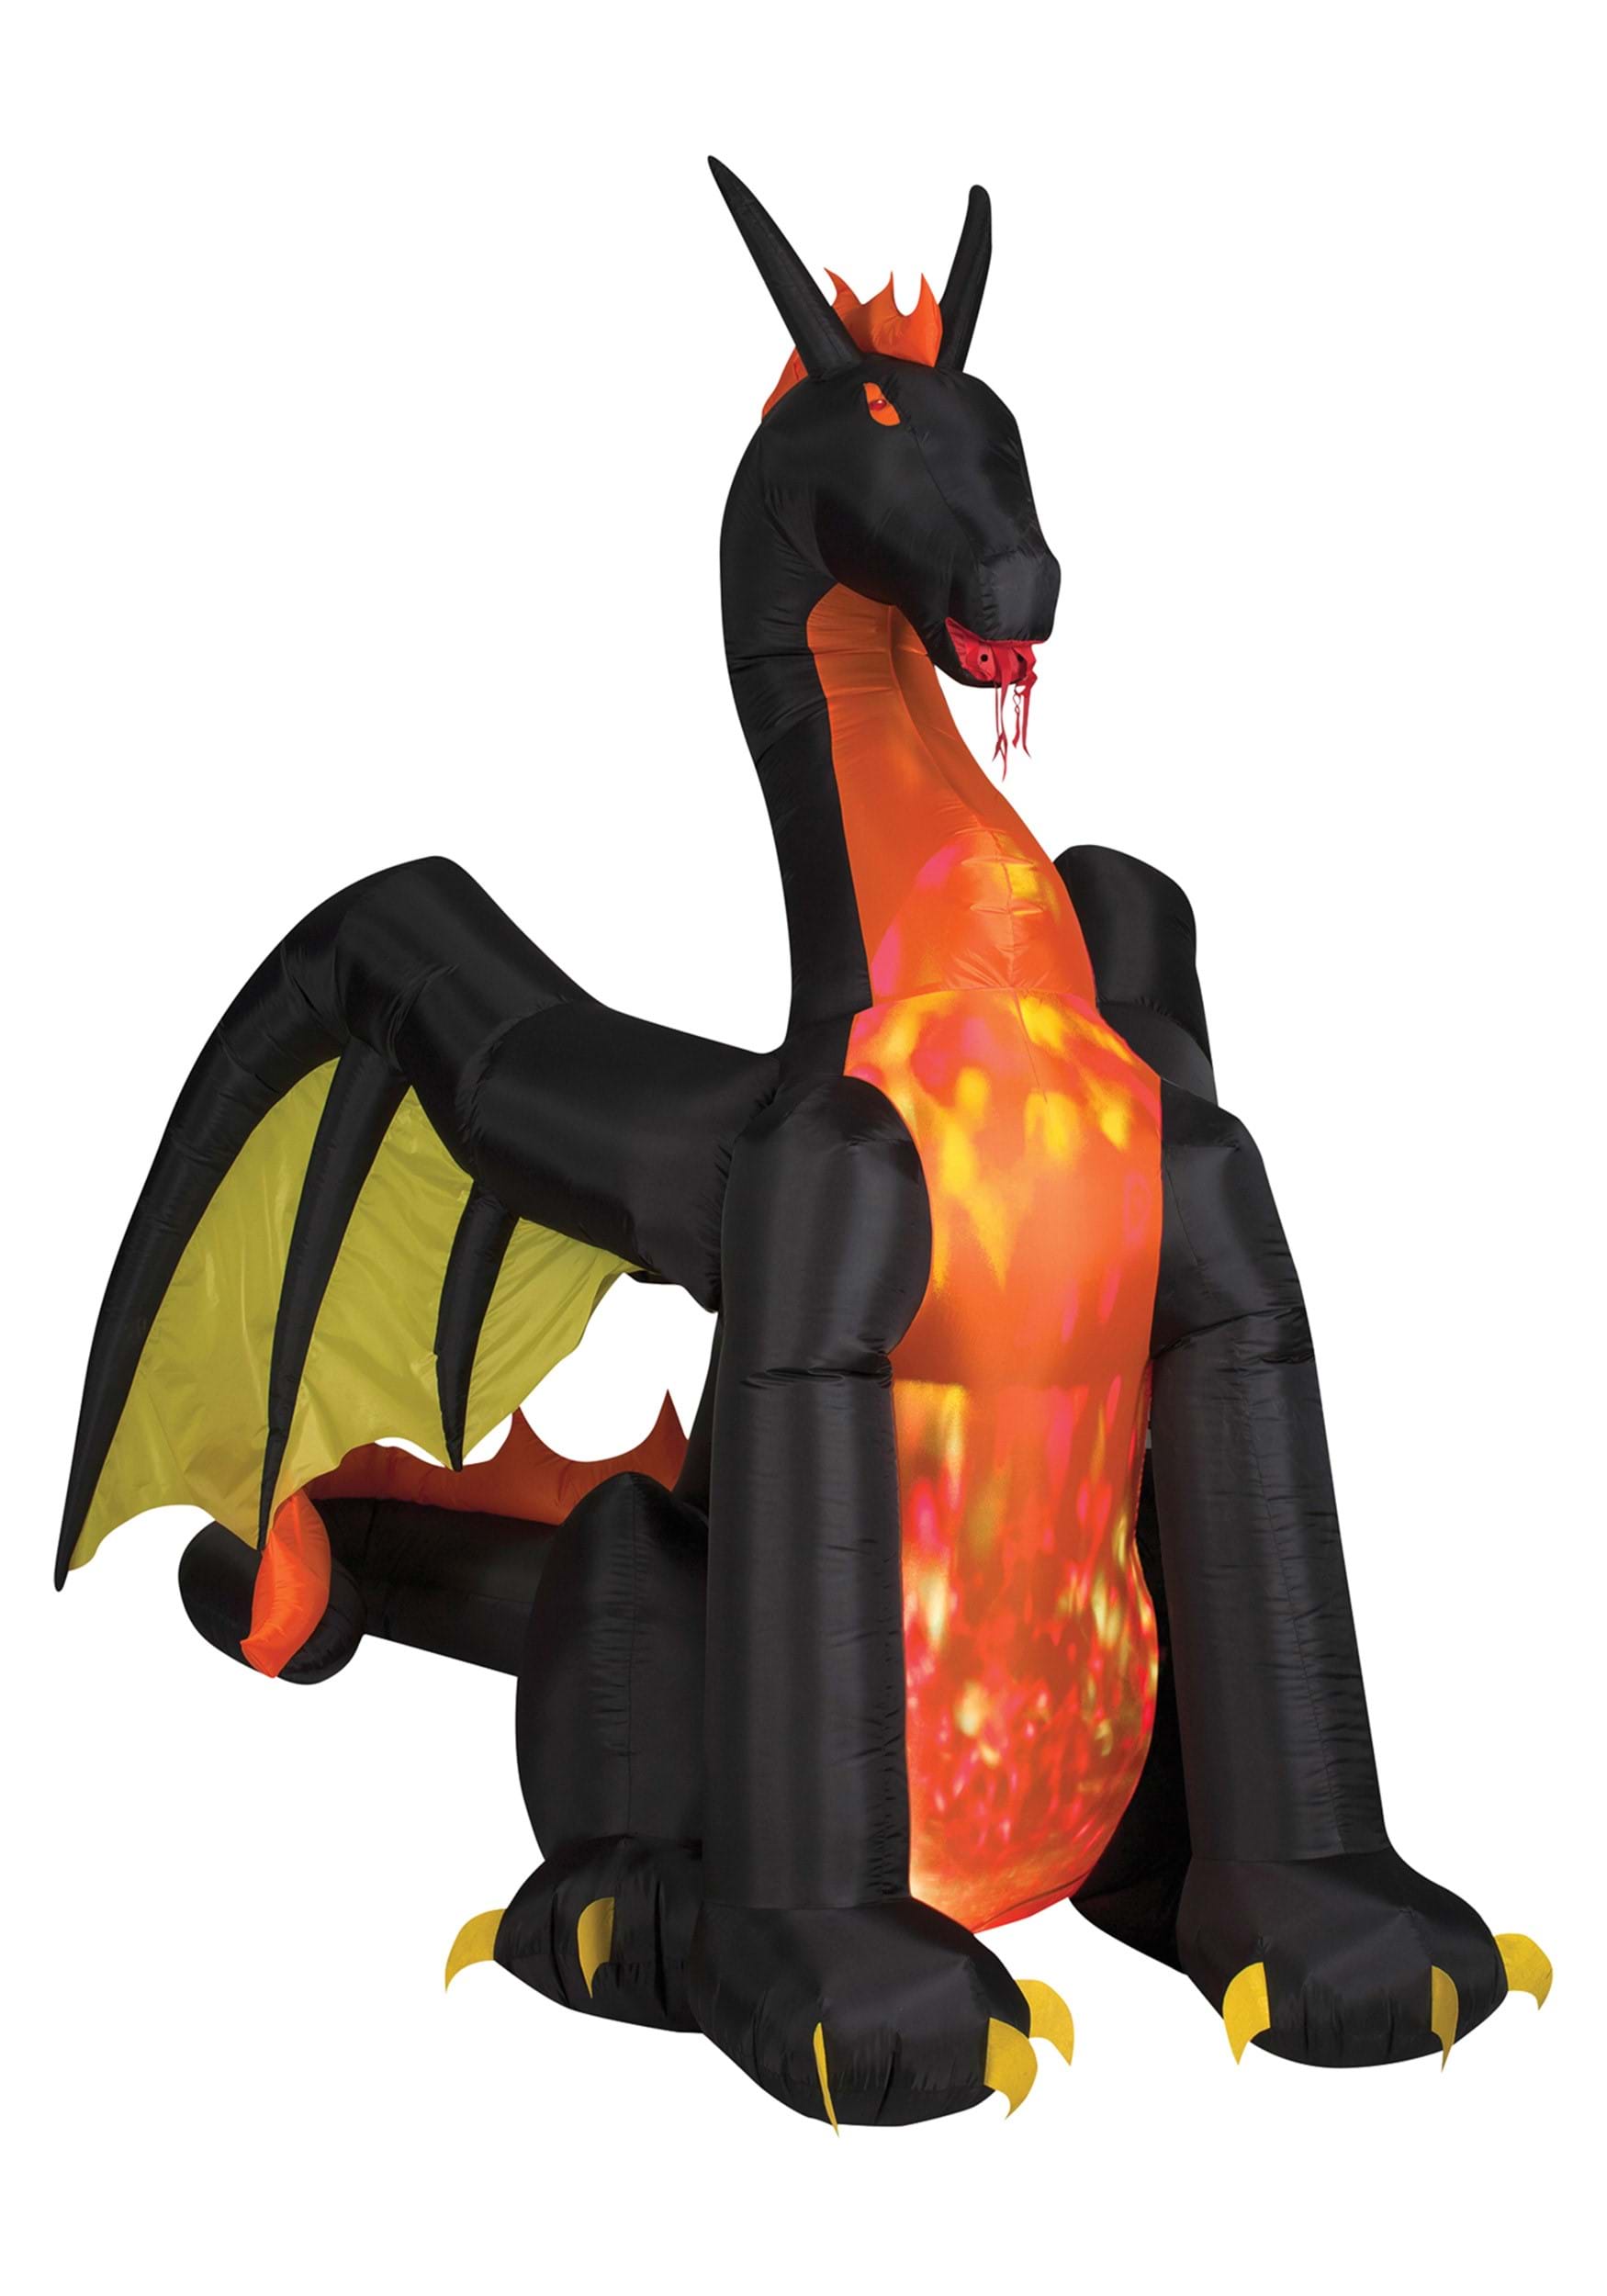 9FT Inflatable Airblown Projection Fire Dragon Prop